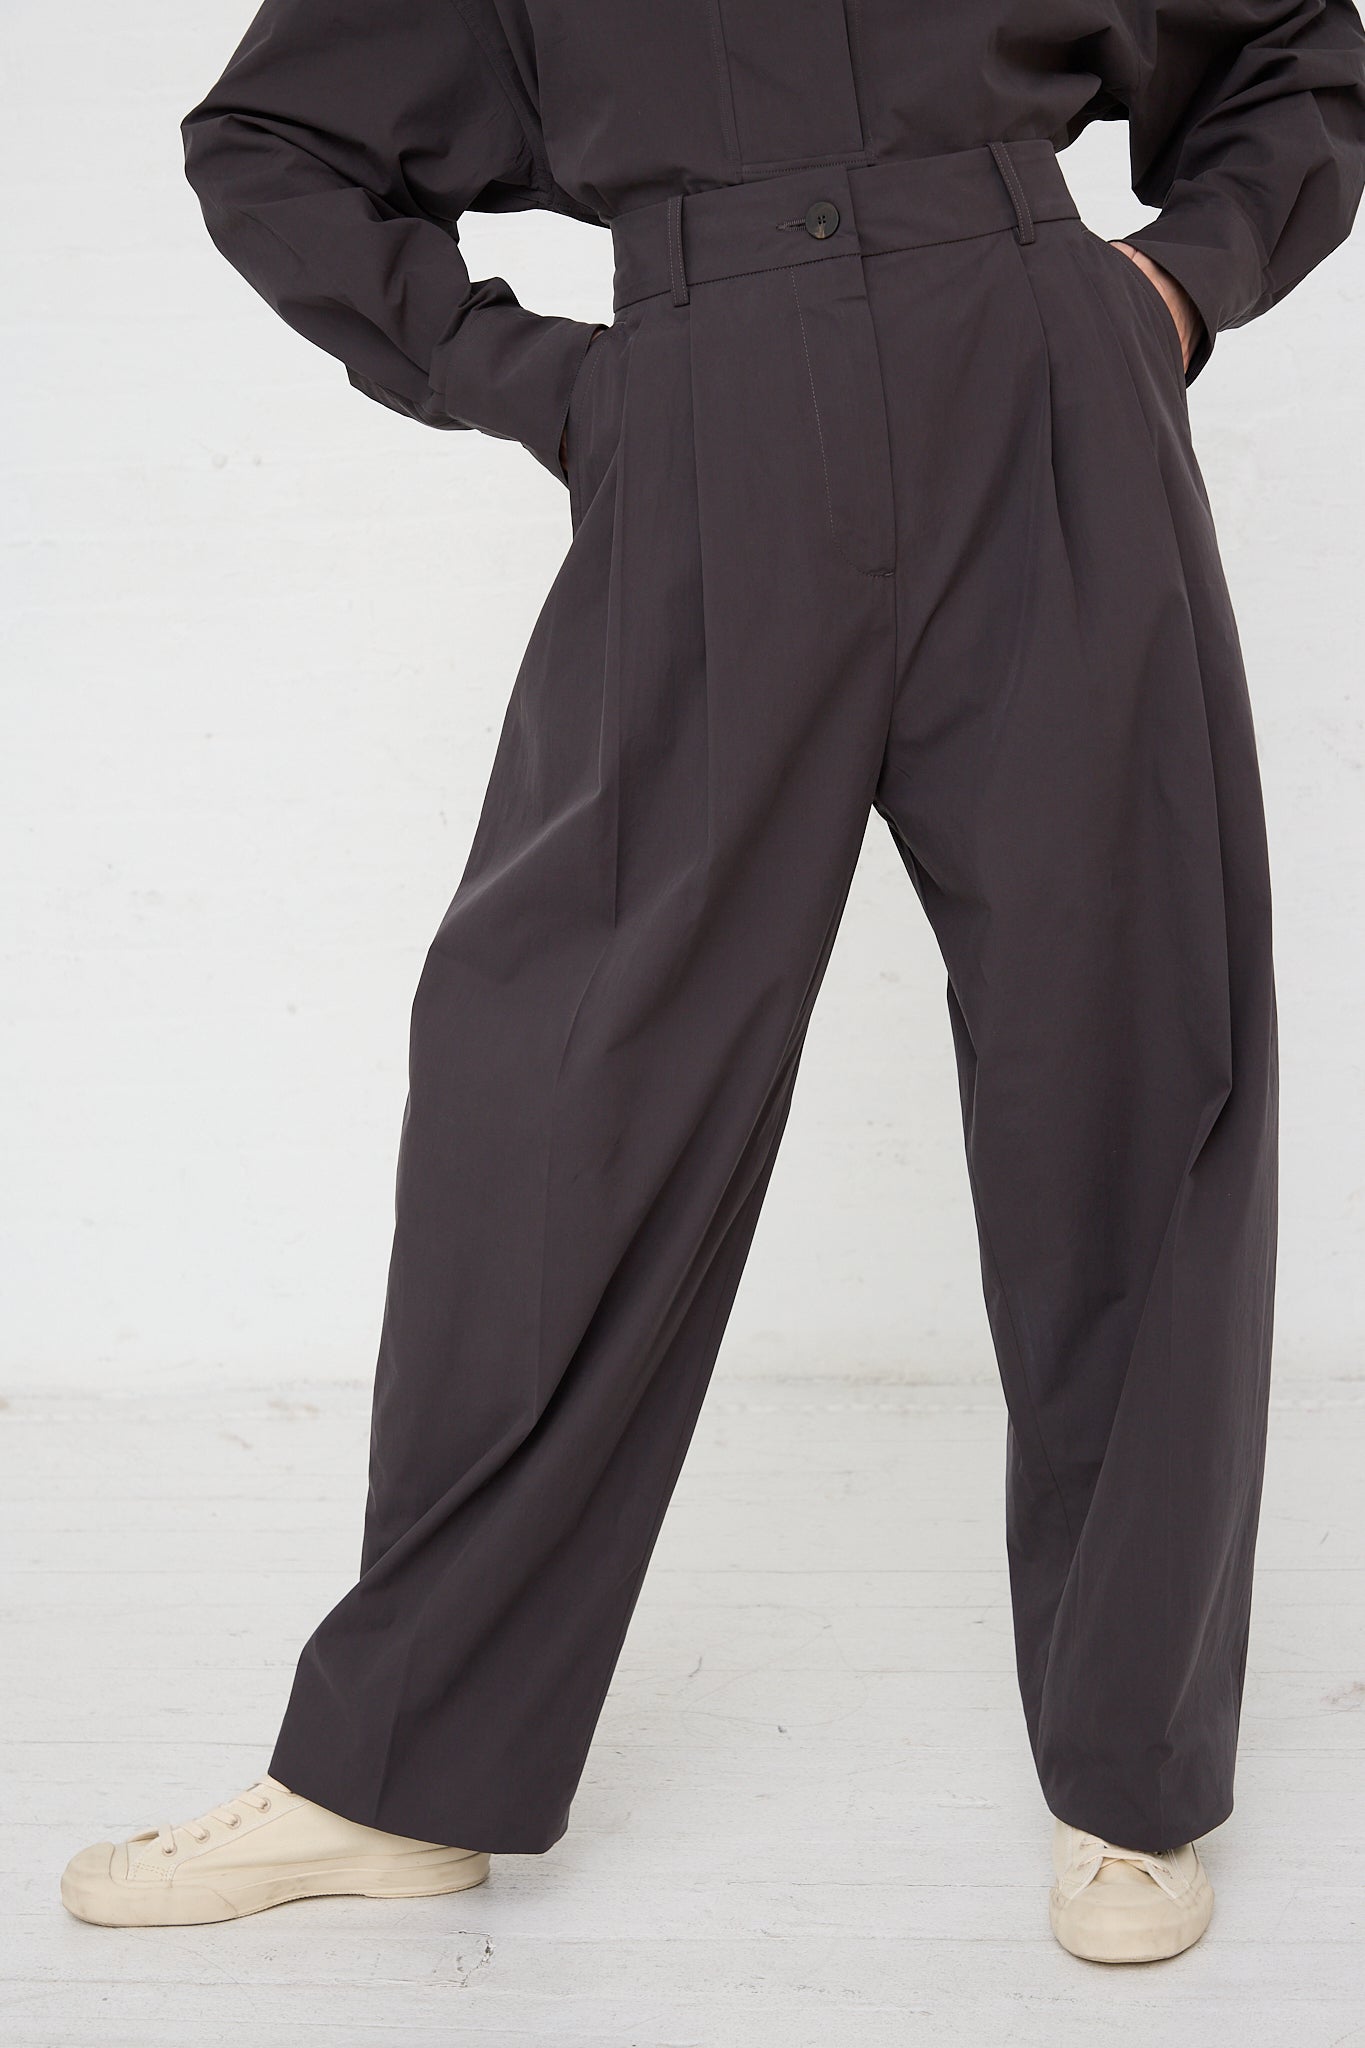 A model wearing an Acuna Double Pleat Front Trouser in Asphalt by Studio Nicholson and a white shirt. Front view of pants. Up close.